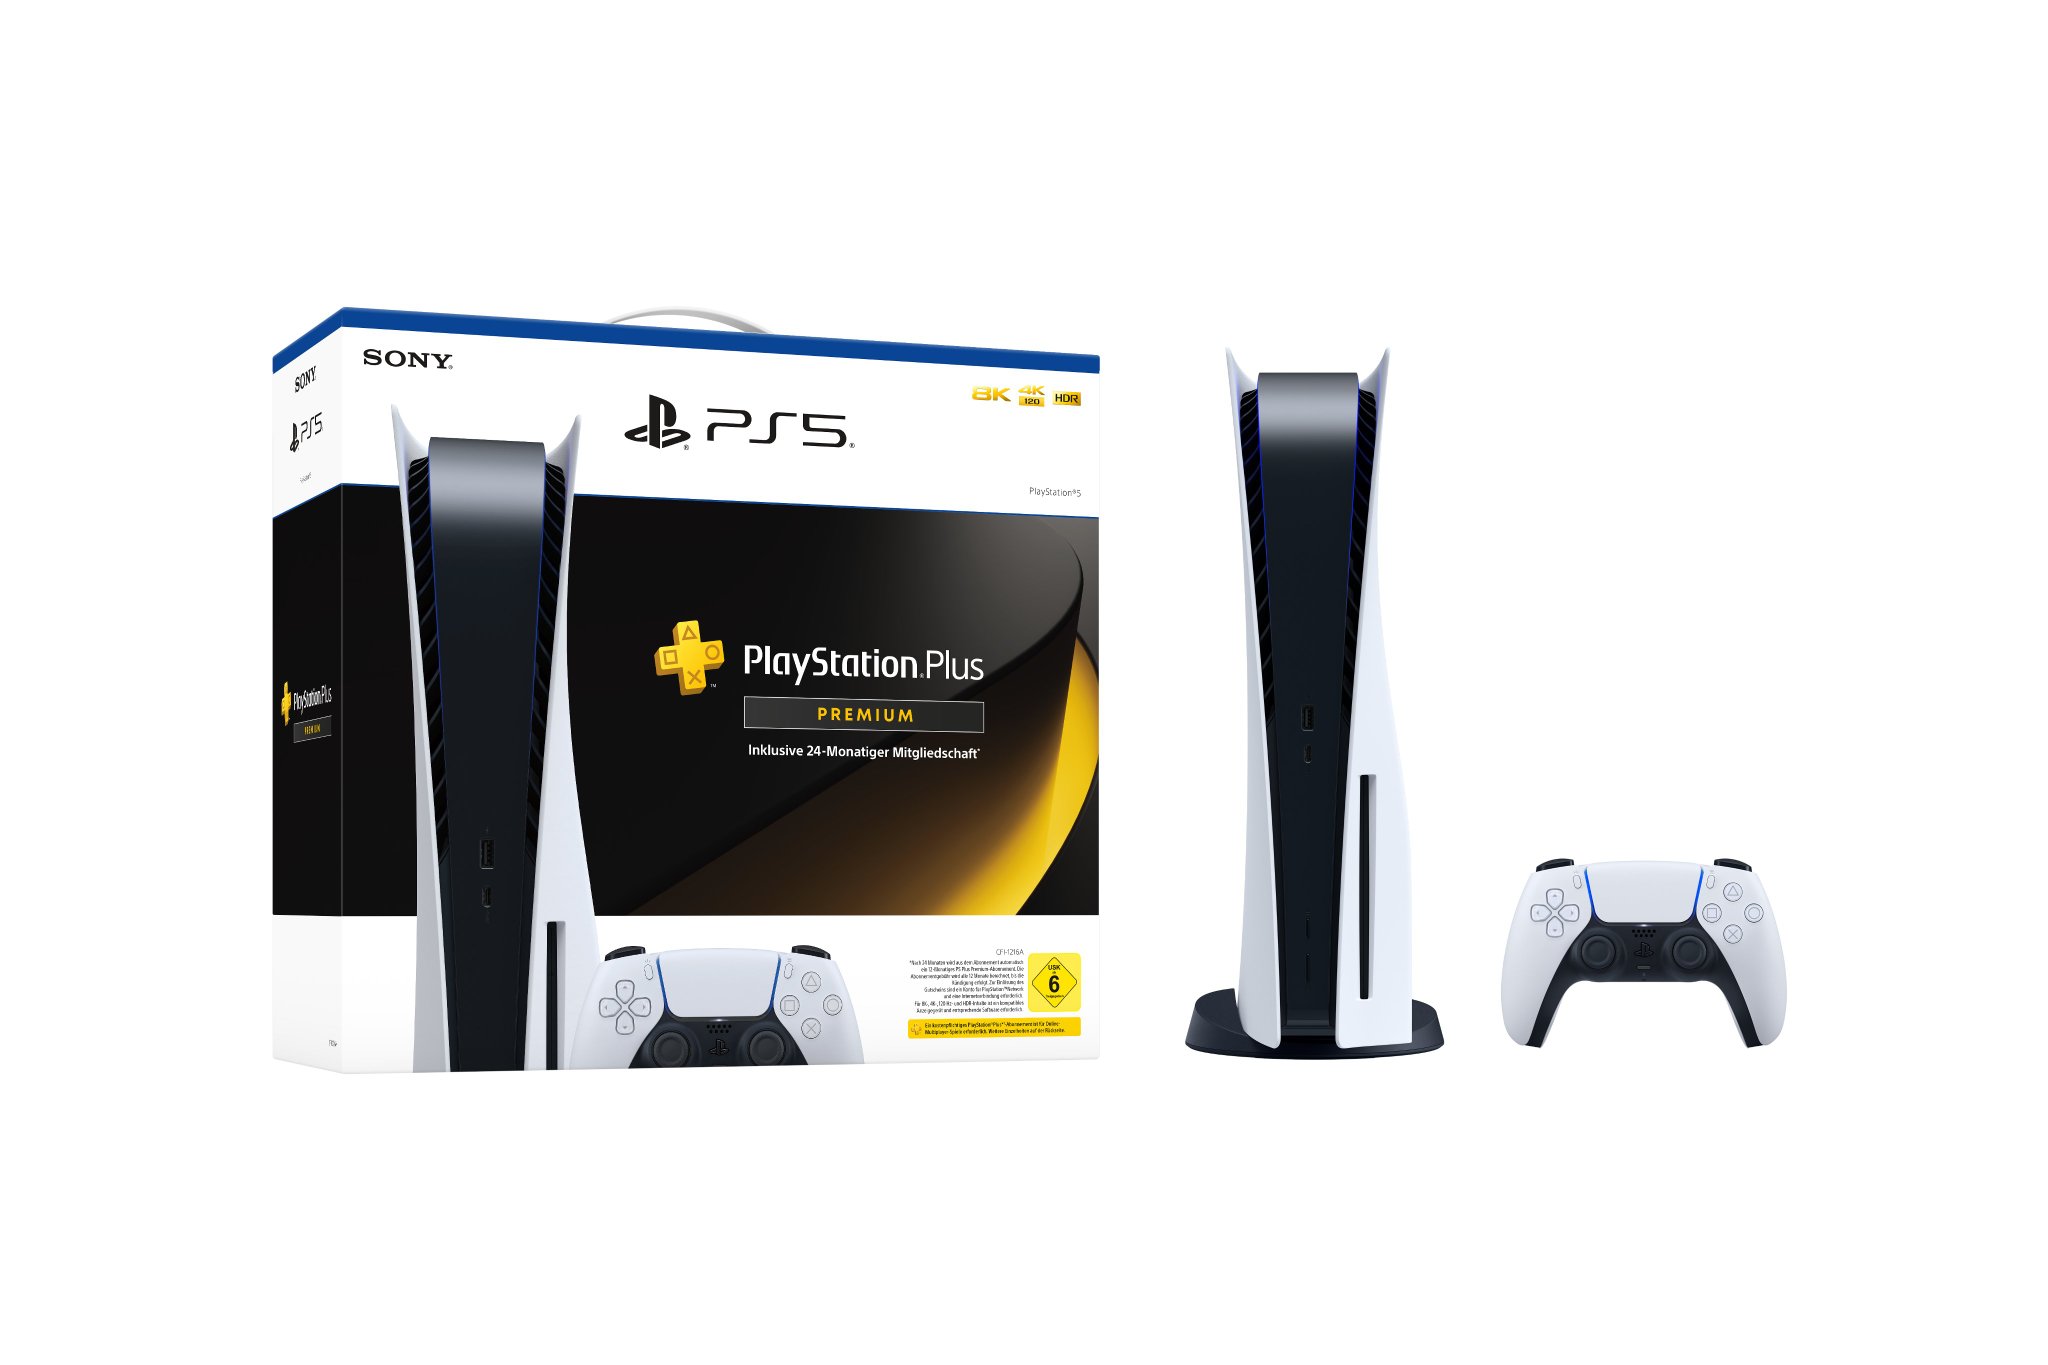 Zuby_Tech on X: PlayStation Plus Premium Full List: #PlayStationPlus # PSPlus #PlayStation #PlayStation5 #PS5  / X